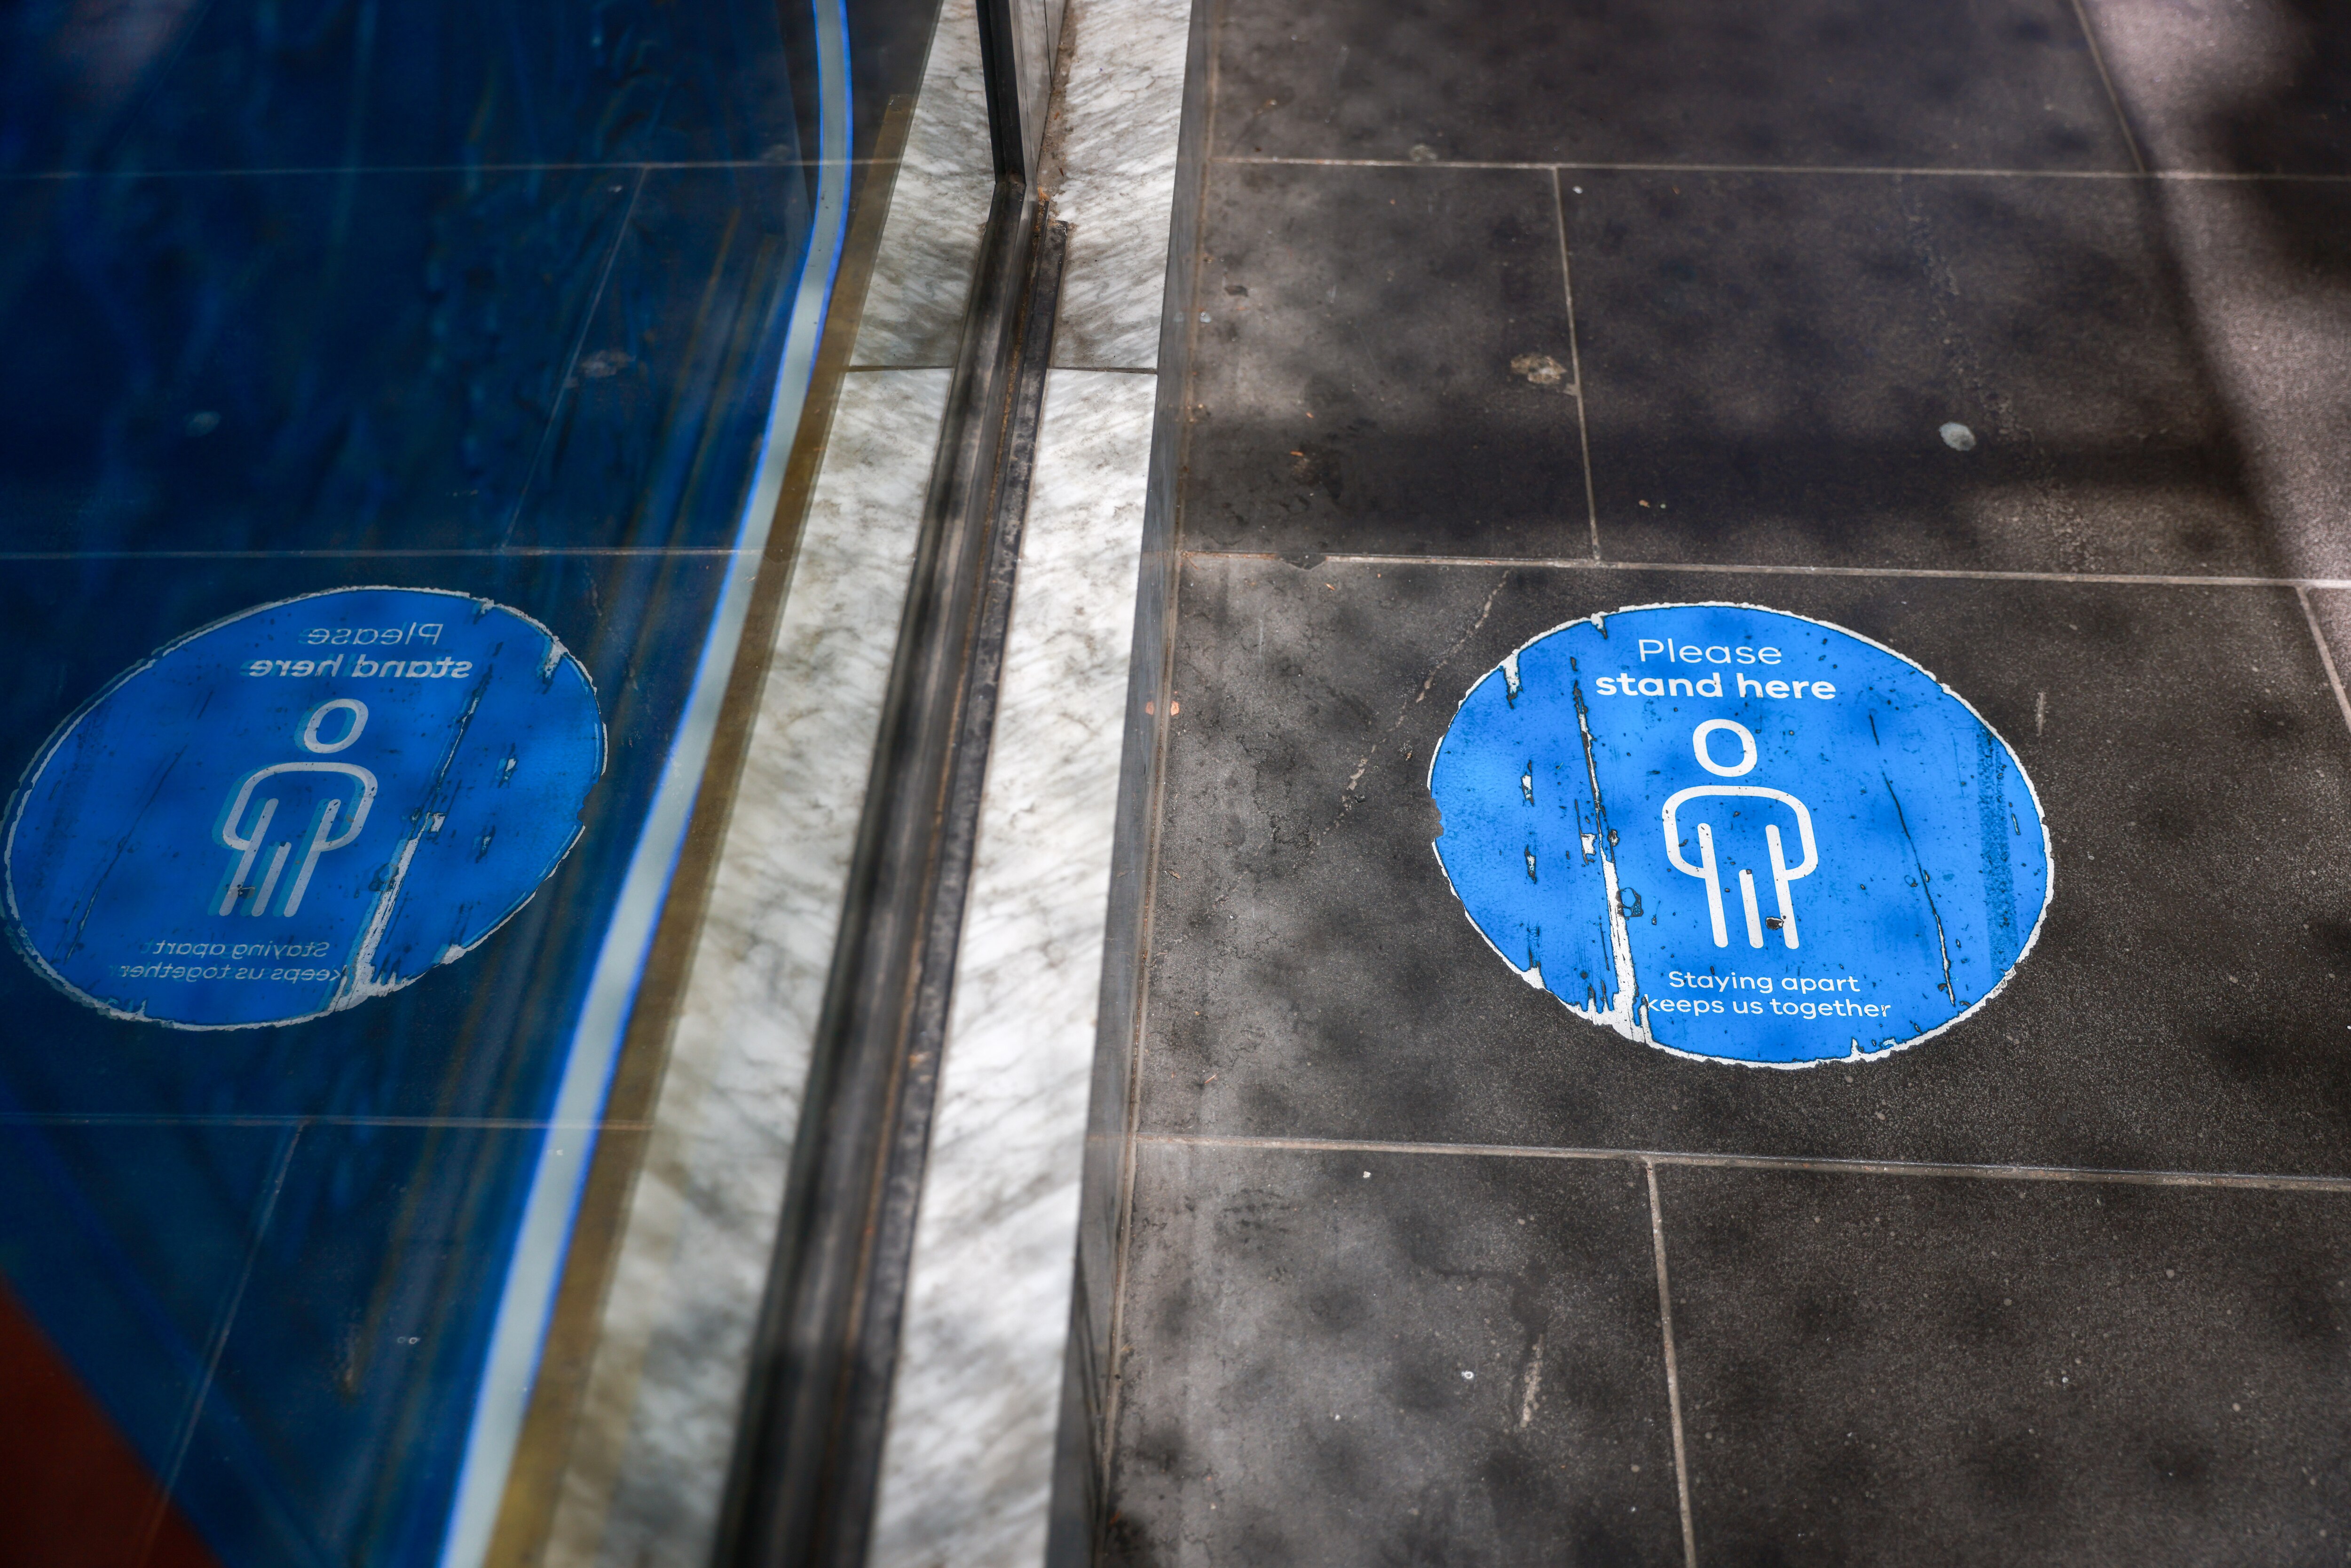 Faded social distance stickers on the footpath and people walking with masks as they pass hand sanitiser stations.